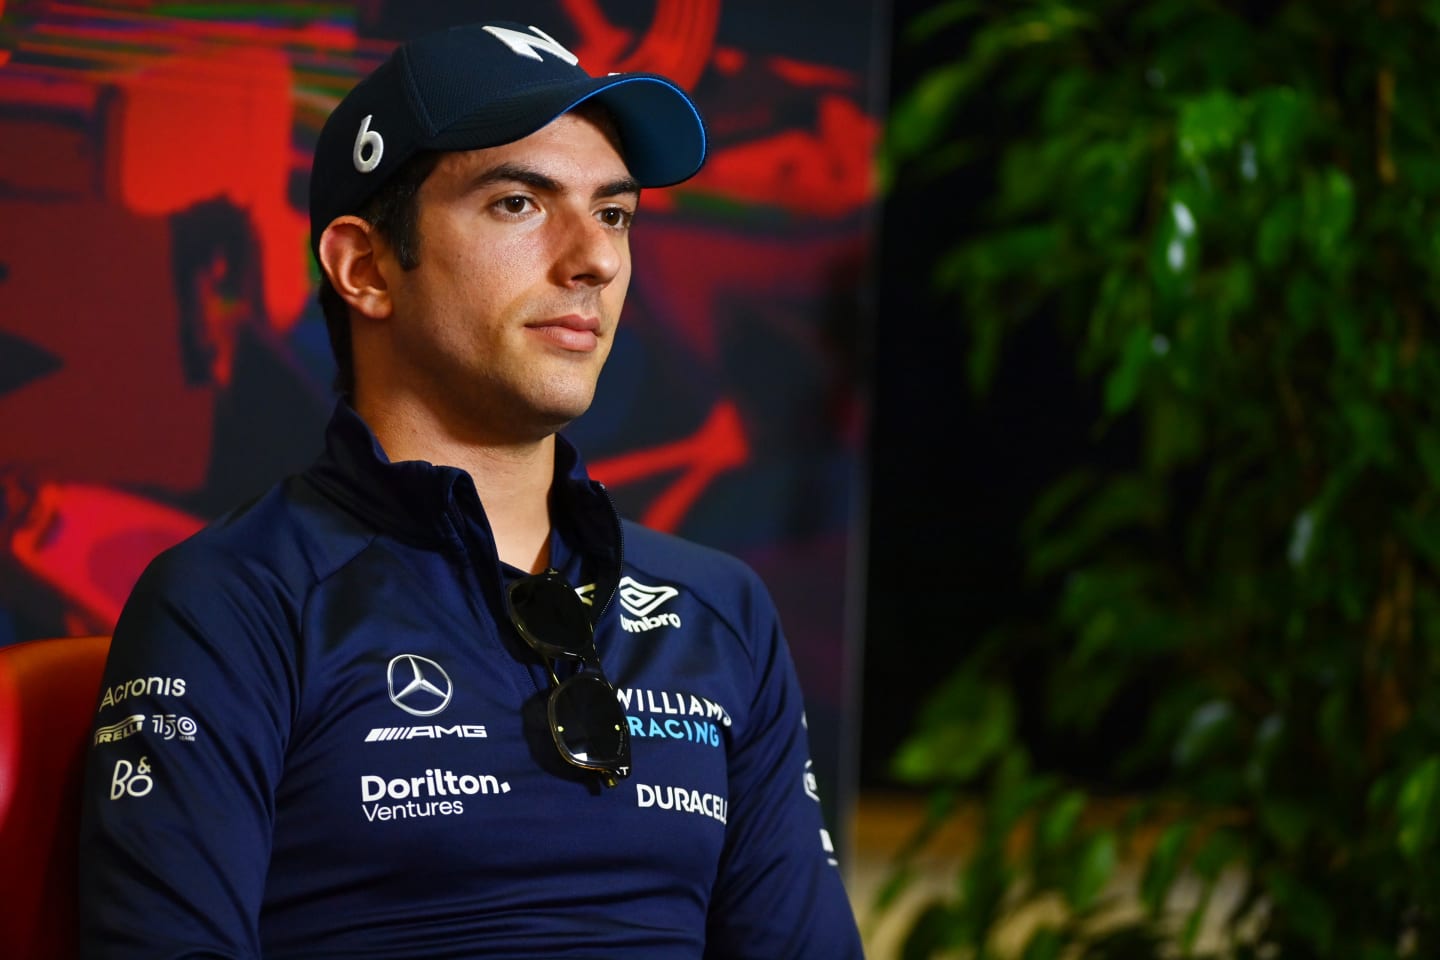 MONZA, ITALY - SEPTEMBER 08: Nicholas Latifi of Canada and Williams talks in the drivers press conference during previews ahead of the F1 Grand Prix of Italy at Autodromo Nazionale Monza on September 08, 2022 in Monza, Italy. (Photo by Dan Mullan/Getty Images)